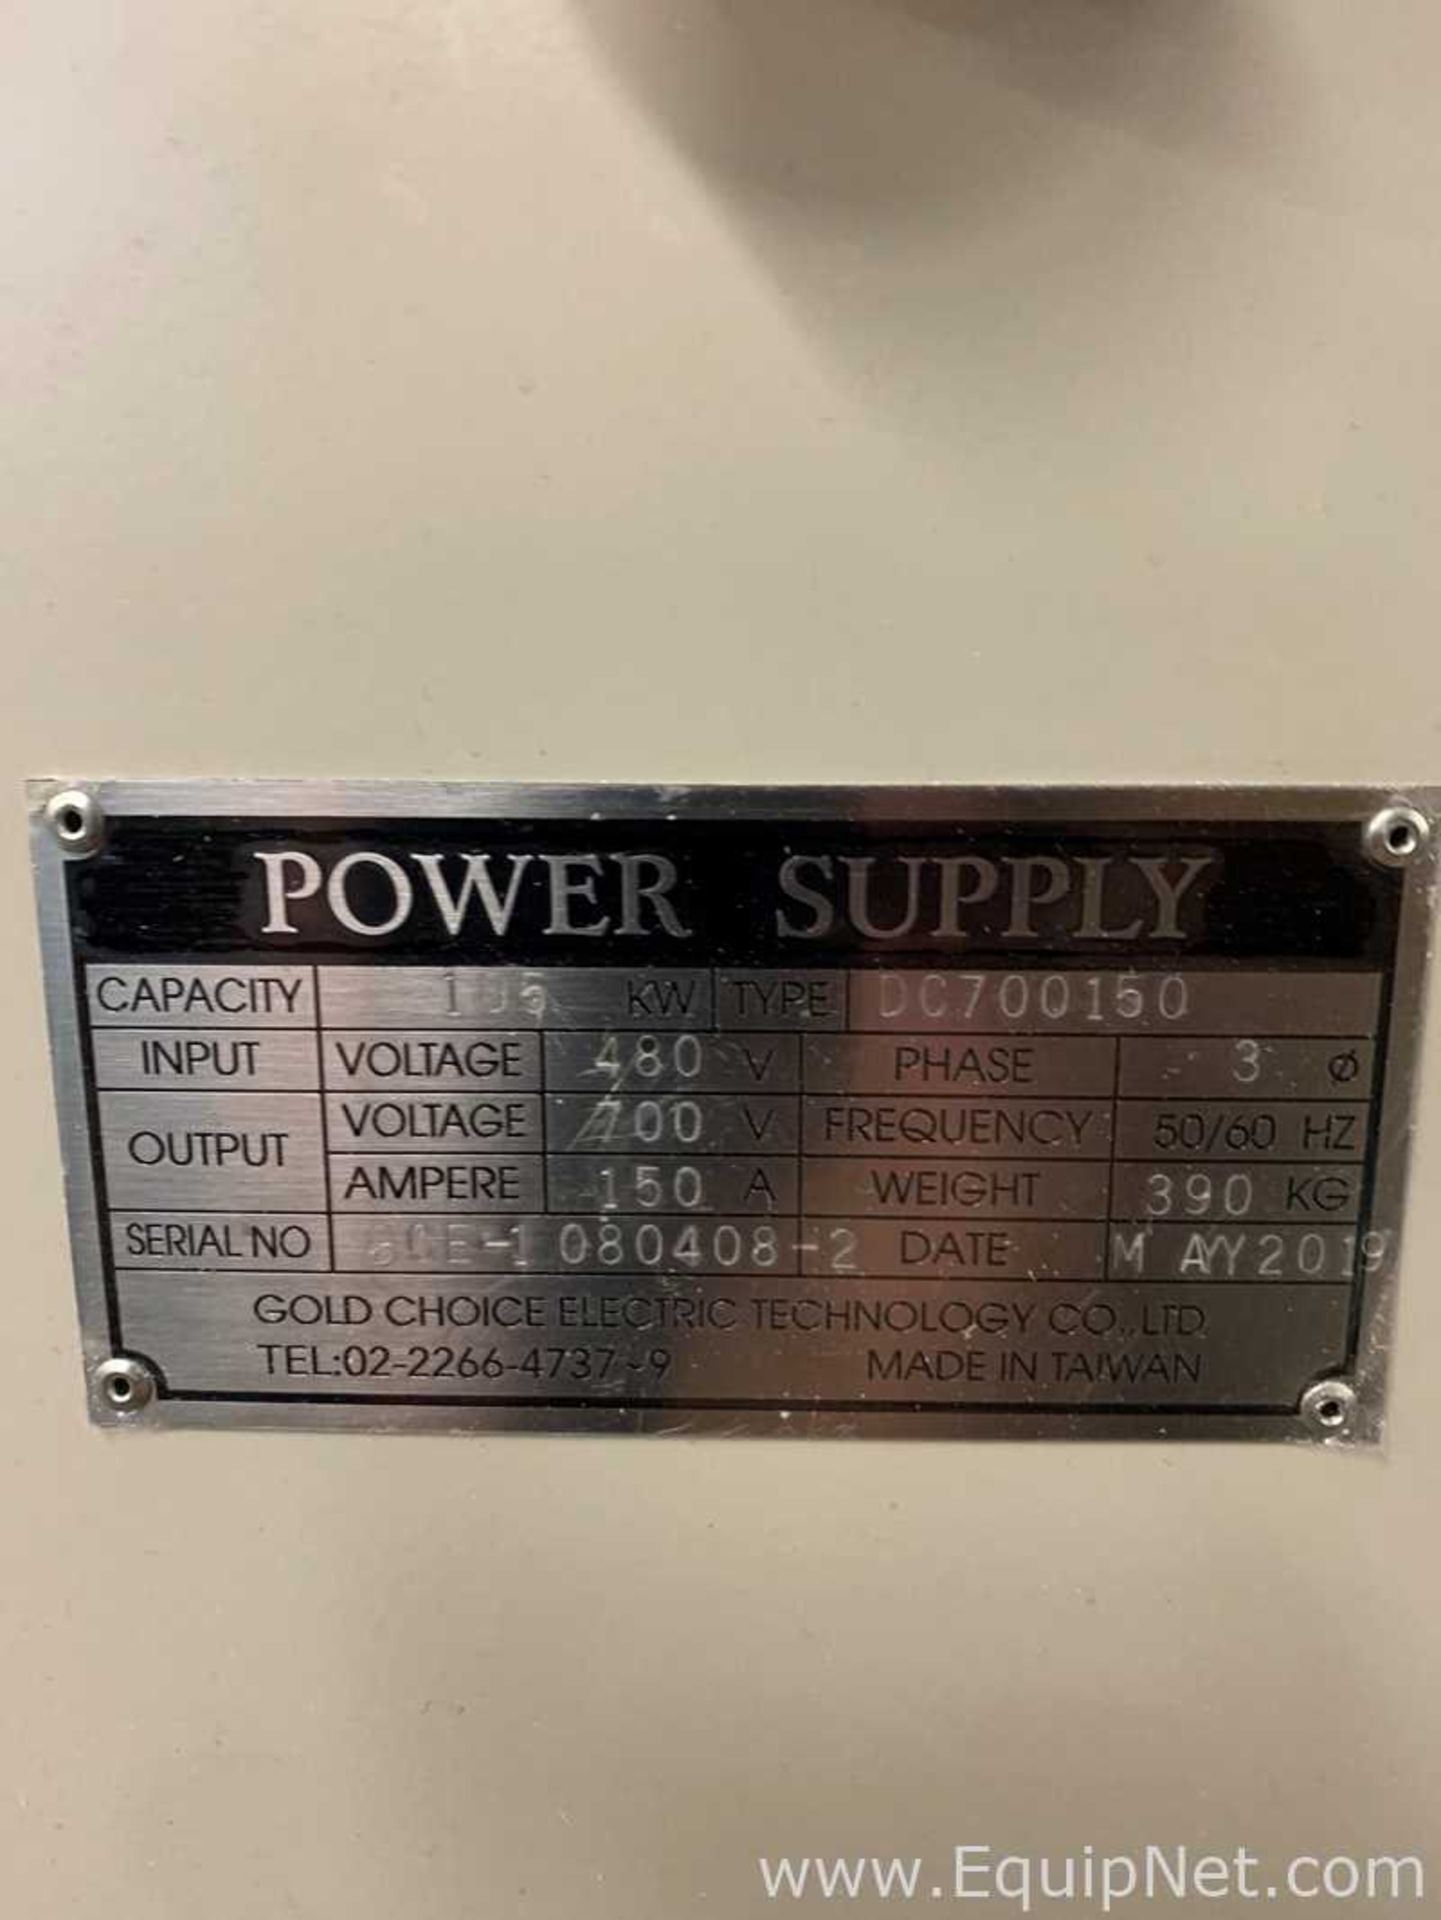 Gold Choice Electric Technology Power Supply DC700150 105 kW - Image 3 of 3